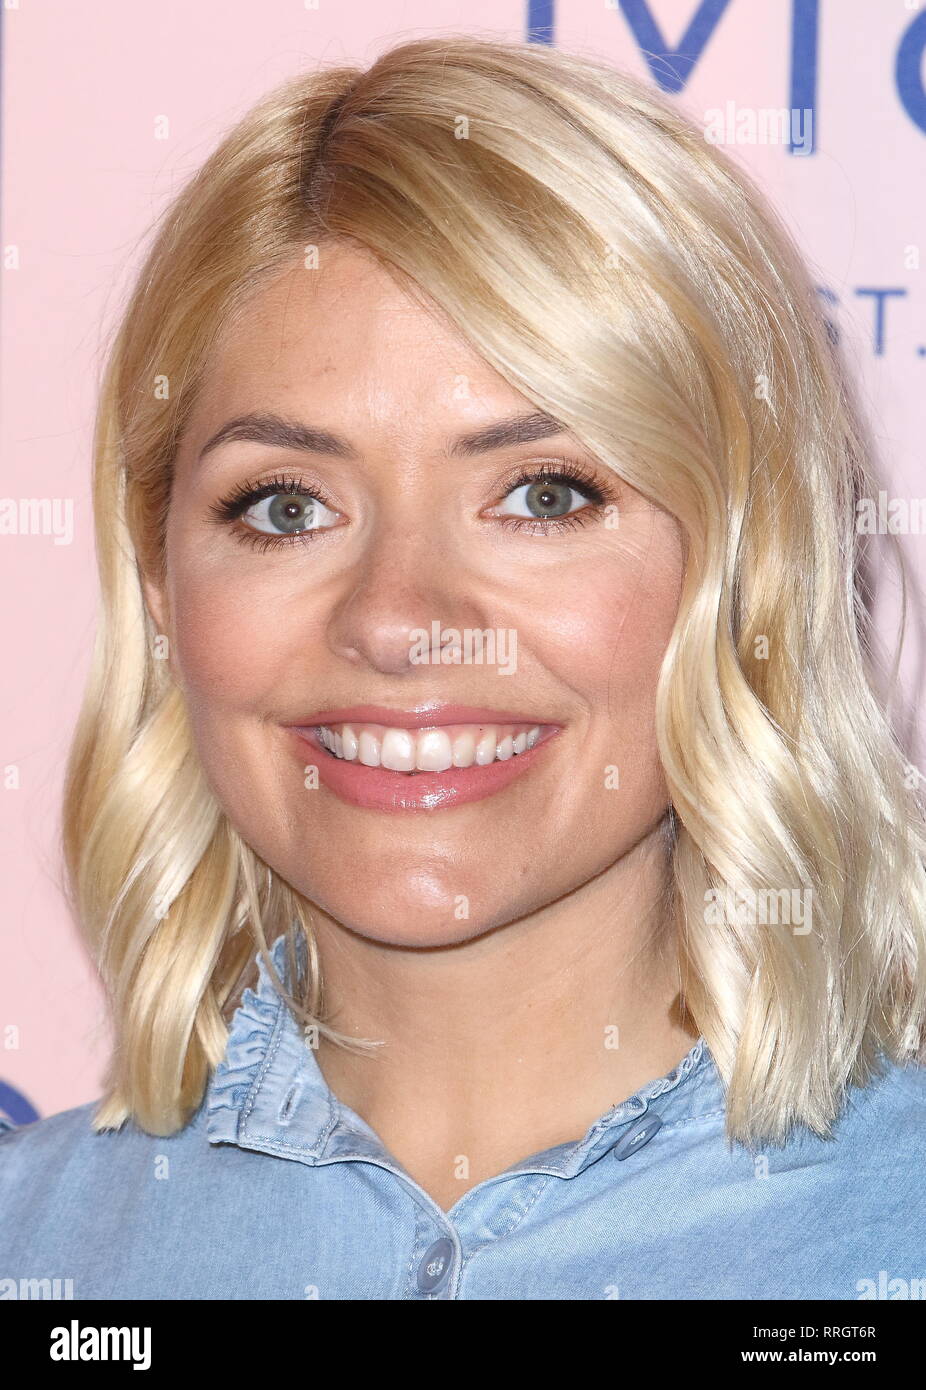 Holly Willoughby, ITV's This Morning presenter hosts press launch and exclusive preview at the Marks & Spencer, Westfield London.  Holly celebrates her new M&S Must-Haves collection by wearing some of the denim range of clothes Stock Photo